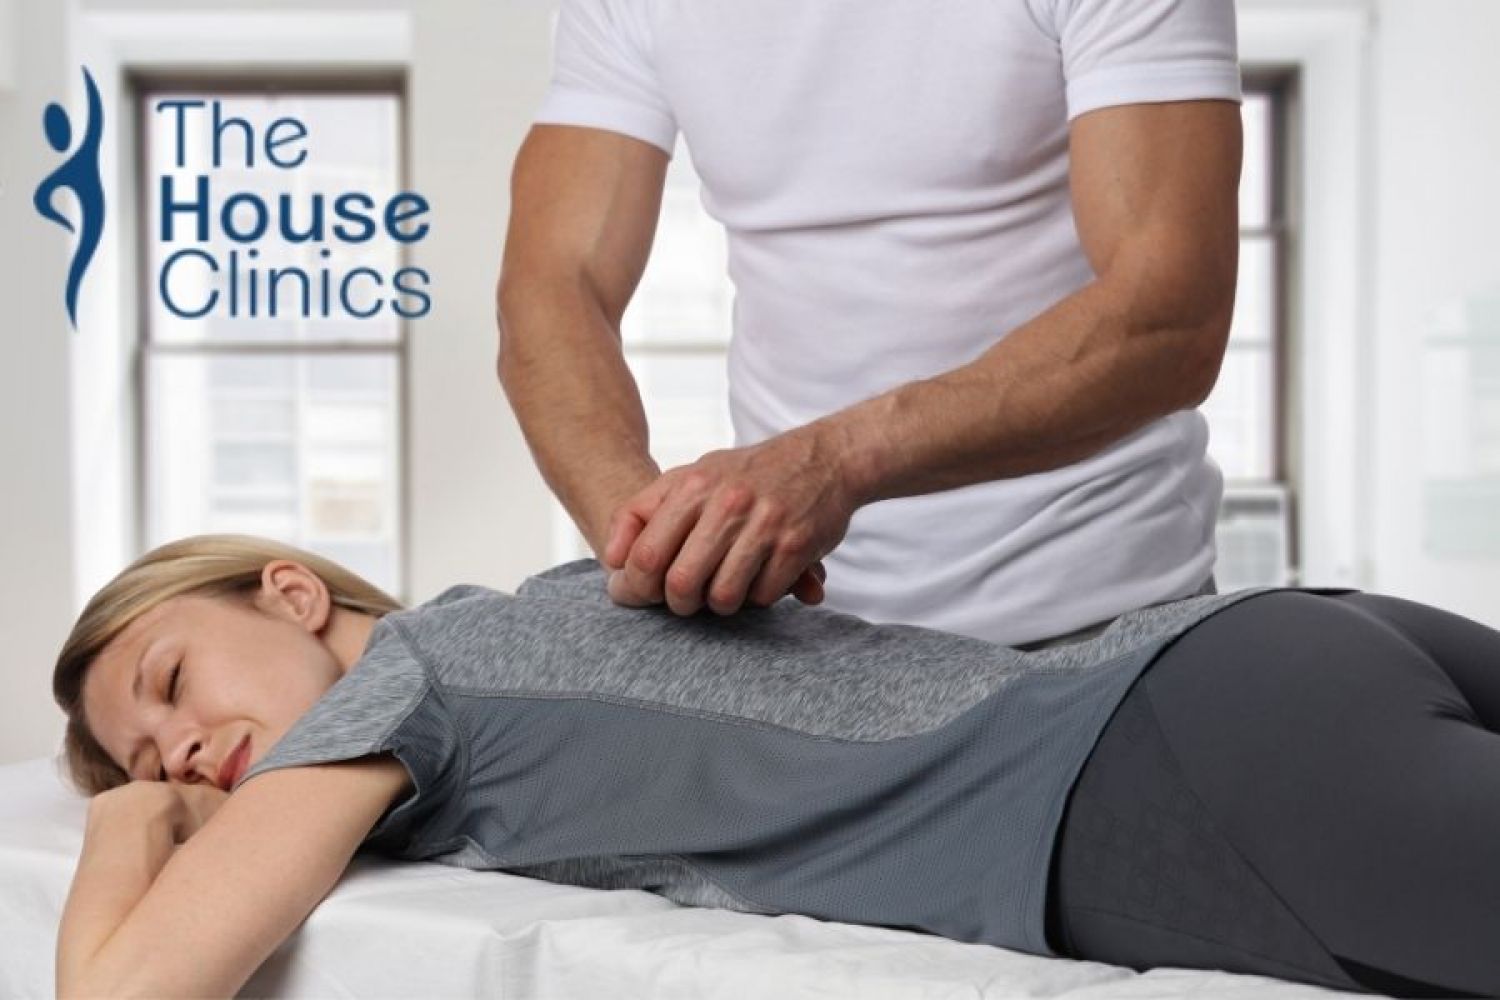 How Often Will I Need To Have Chiropractic Treatment?